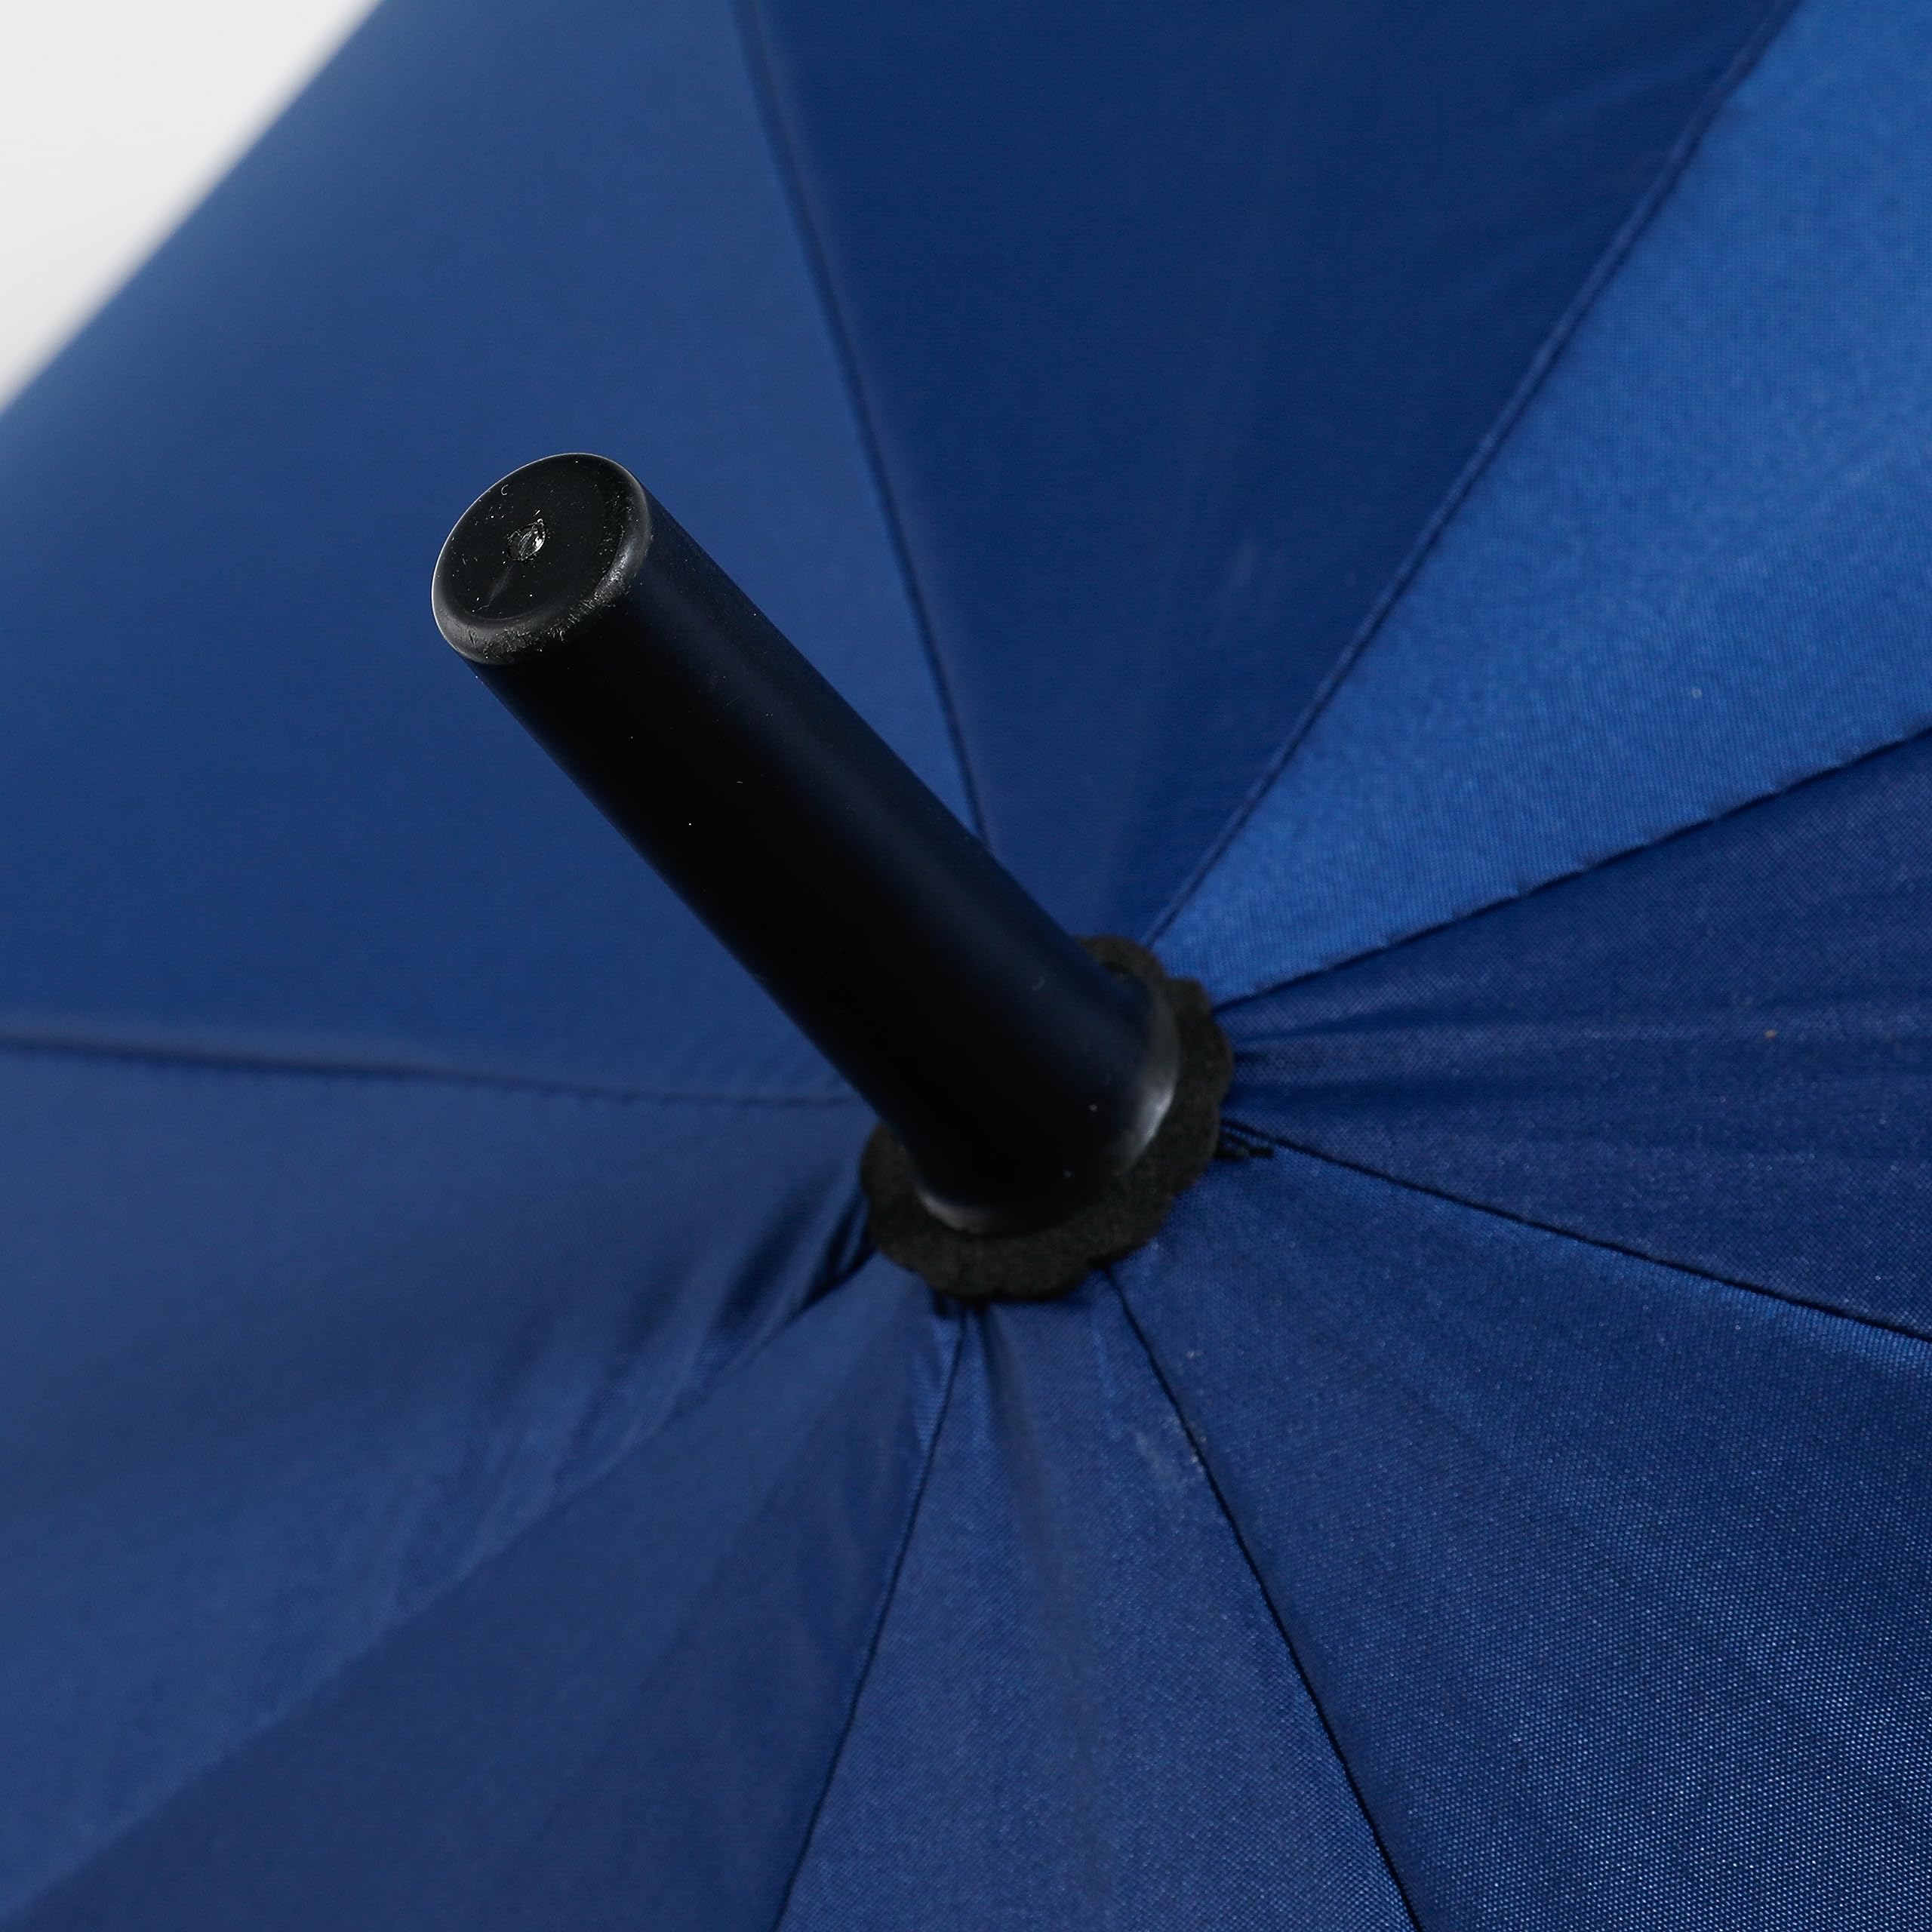 ABSORBIA 8K Straight and Stick Umbrella for rain, Windproof, Waterproof and UV proof black Coated | Open Diameter 105cm Double Layer Umbrella With Cover|Navy Blue……